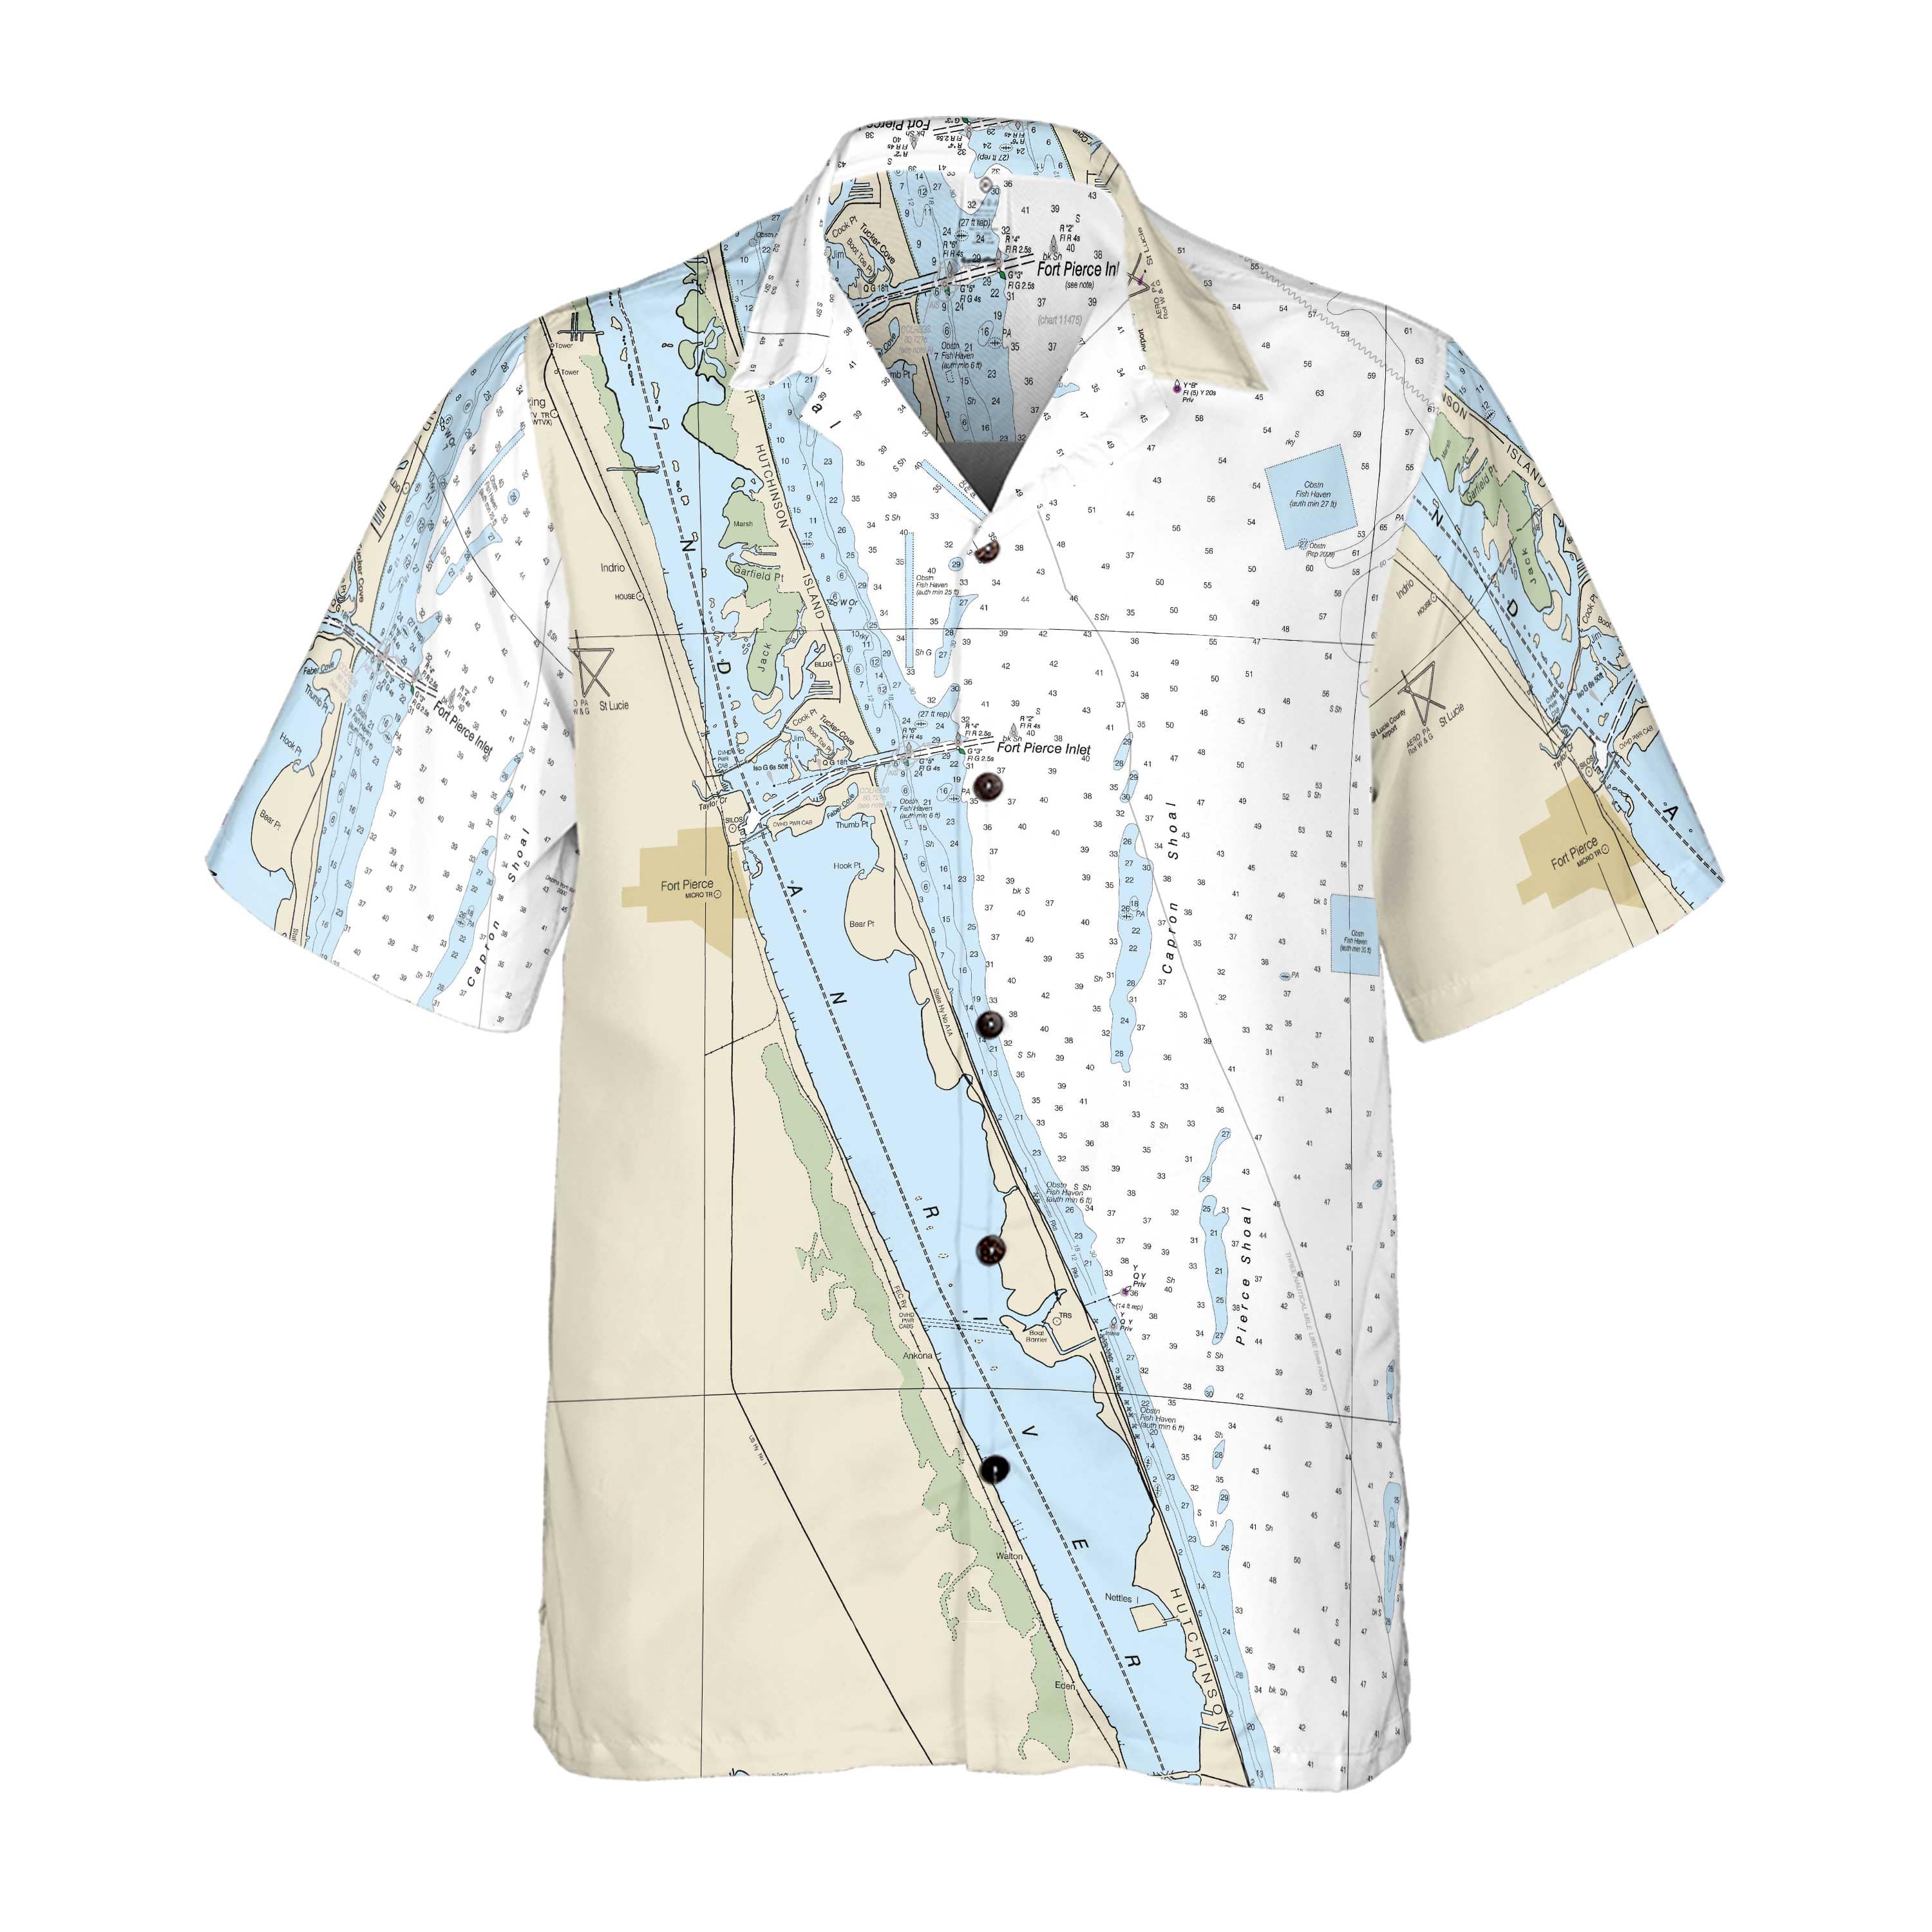 The Fort Pierce Coconut Button Camp Shirt